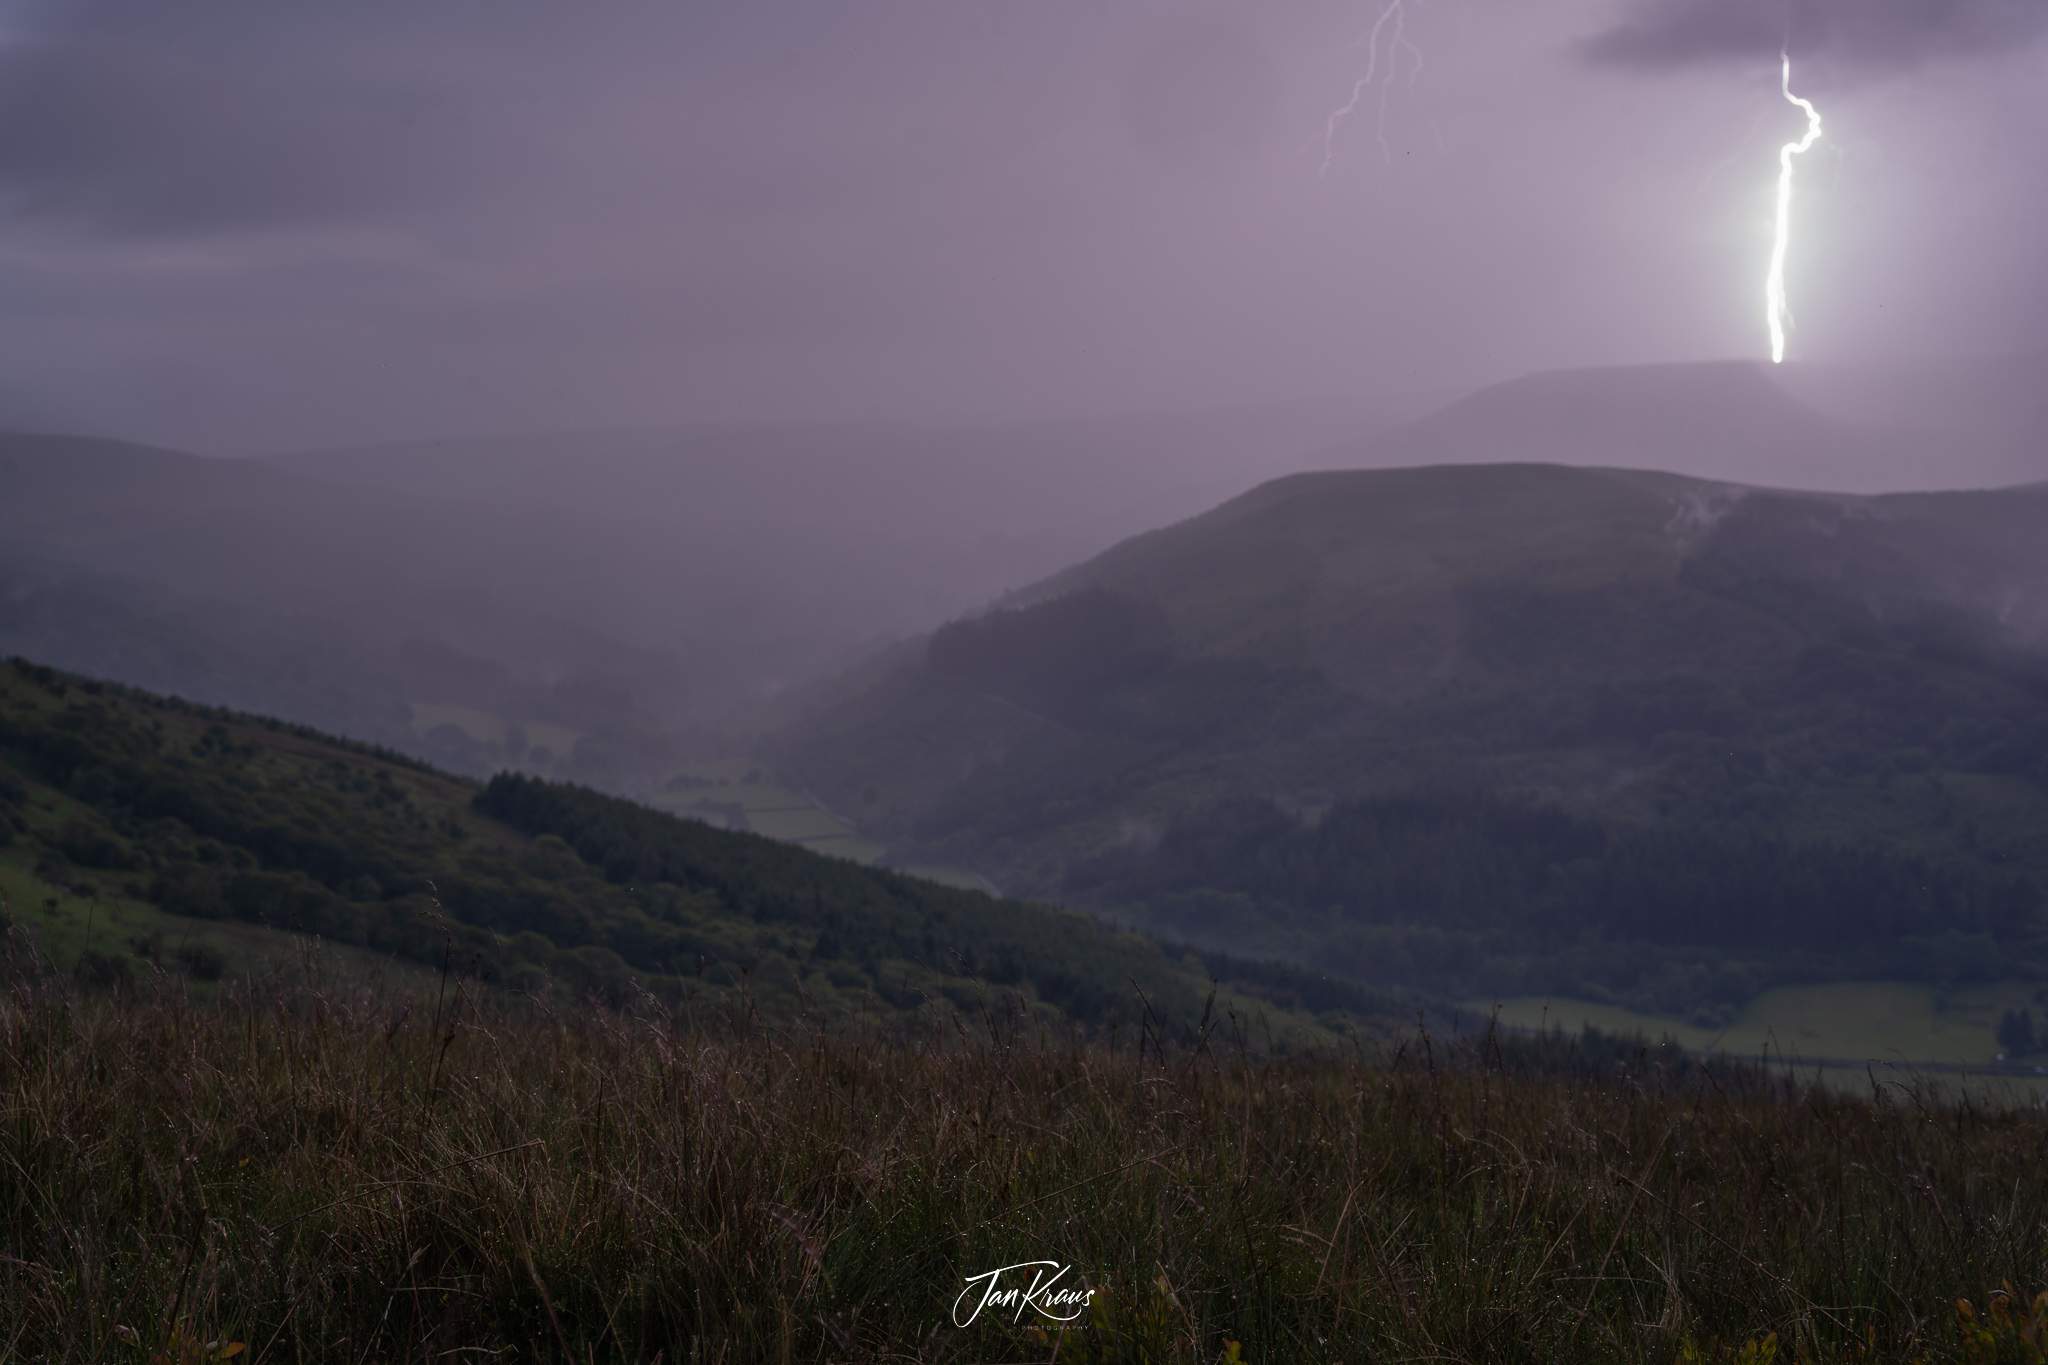 A thunderstorm over the Black Mountains, Day 3 of the Beacons Way hike, Wales, UK